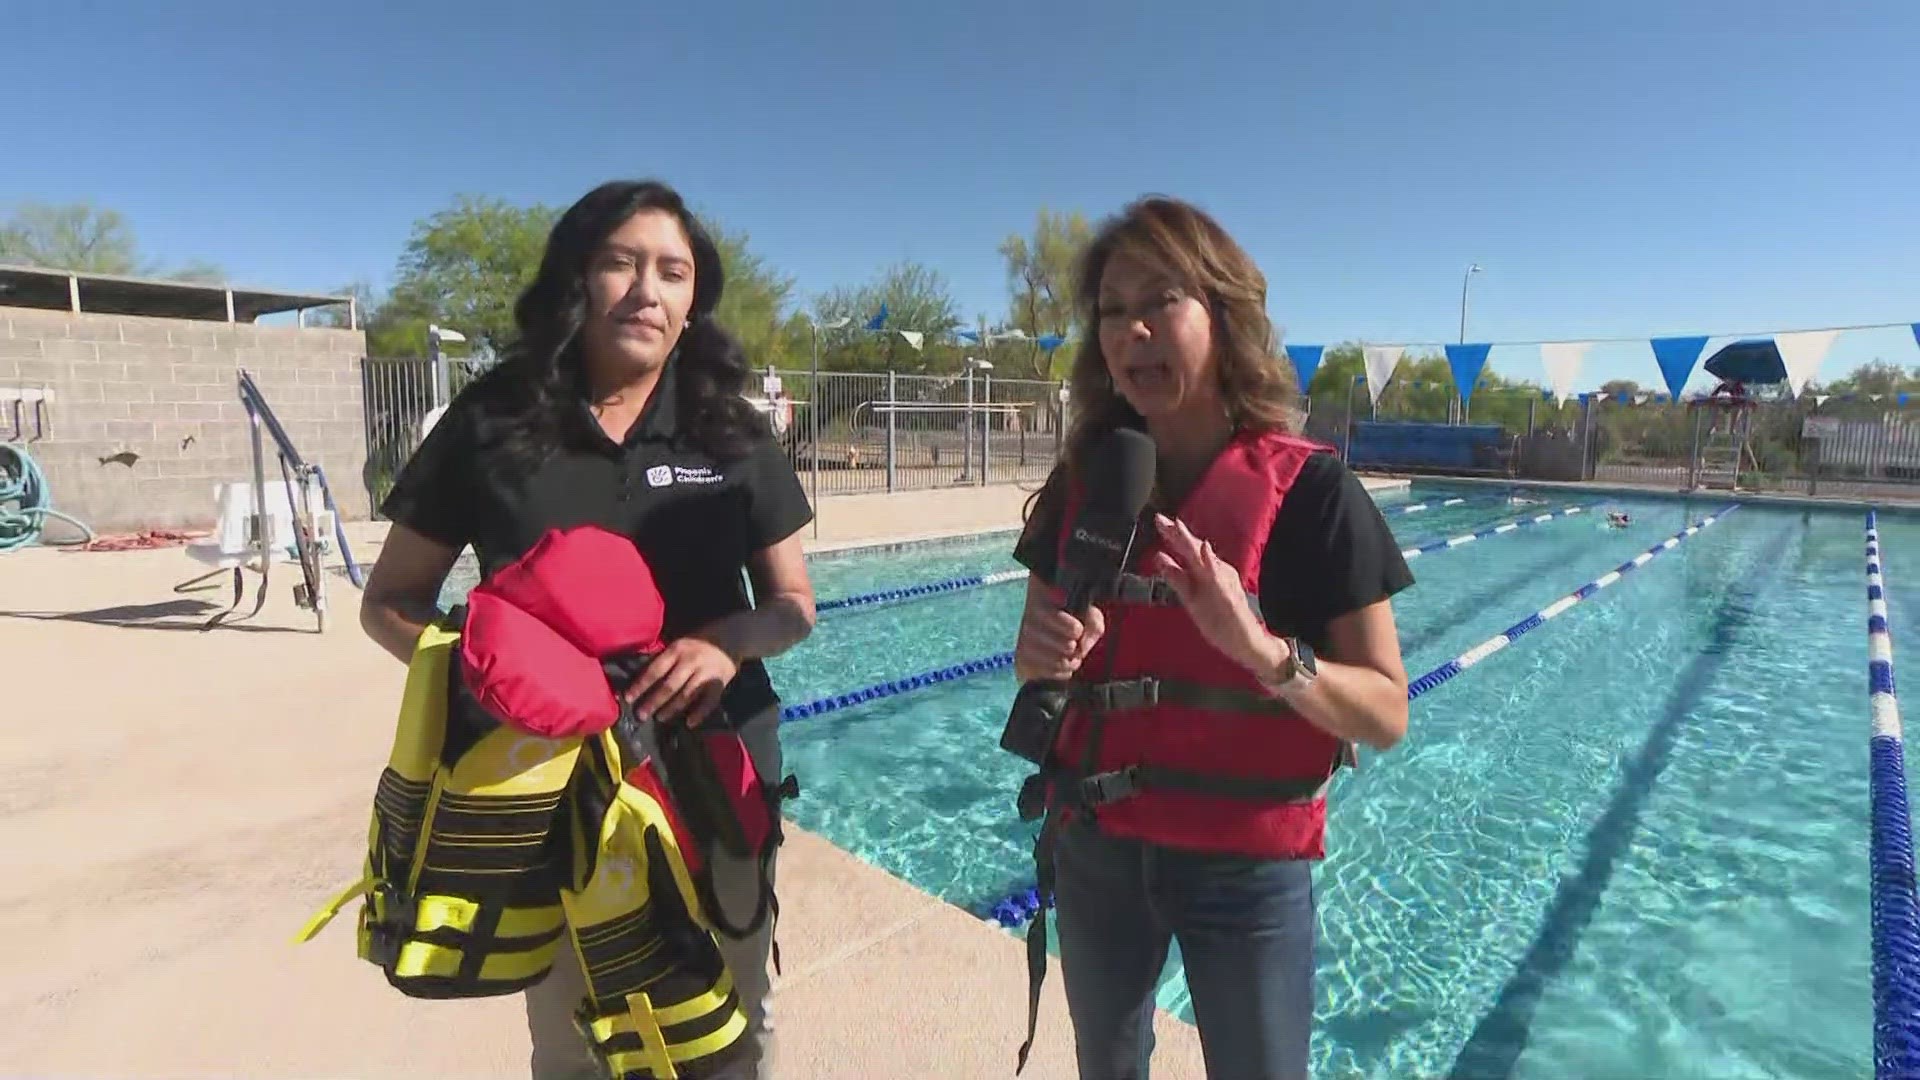 As part of our Water Watch Campaign 12News is giving you tools and resources to keep your family safe around water.